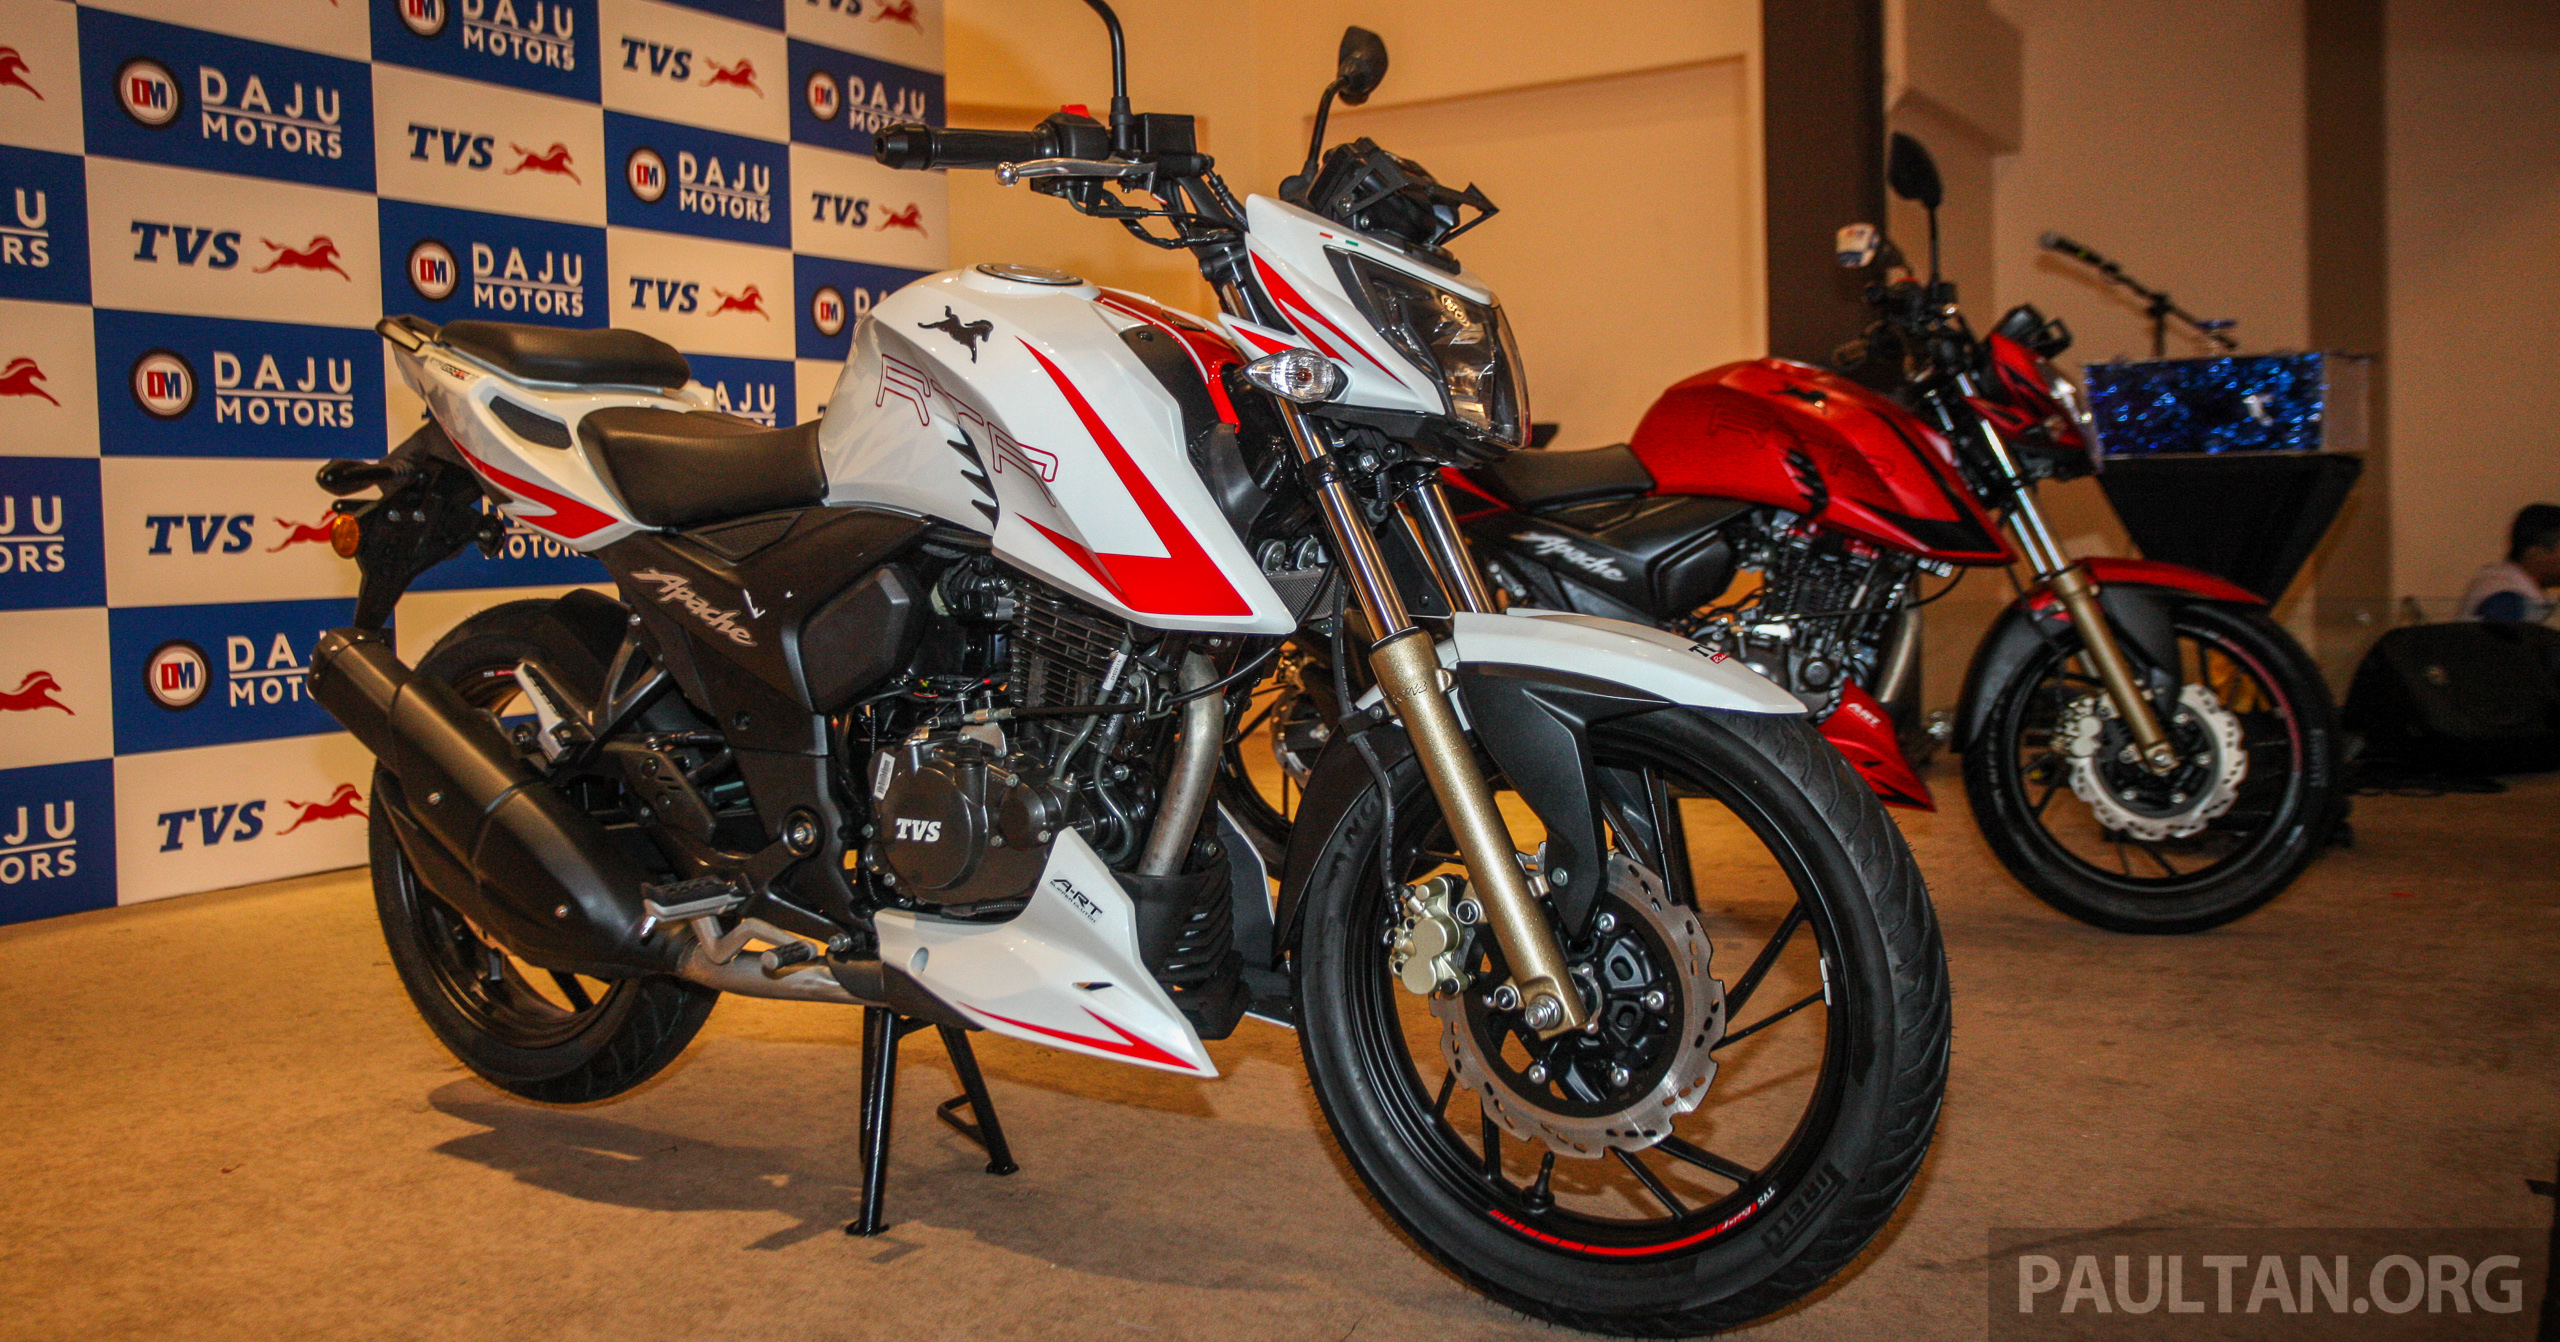 2019 Tvs Apache Rtr200 4v Race Edition And Neo X3i Launched In